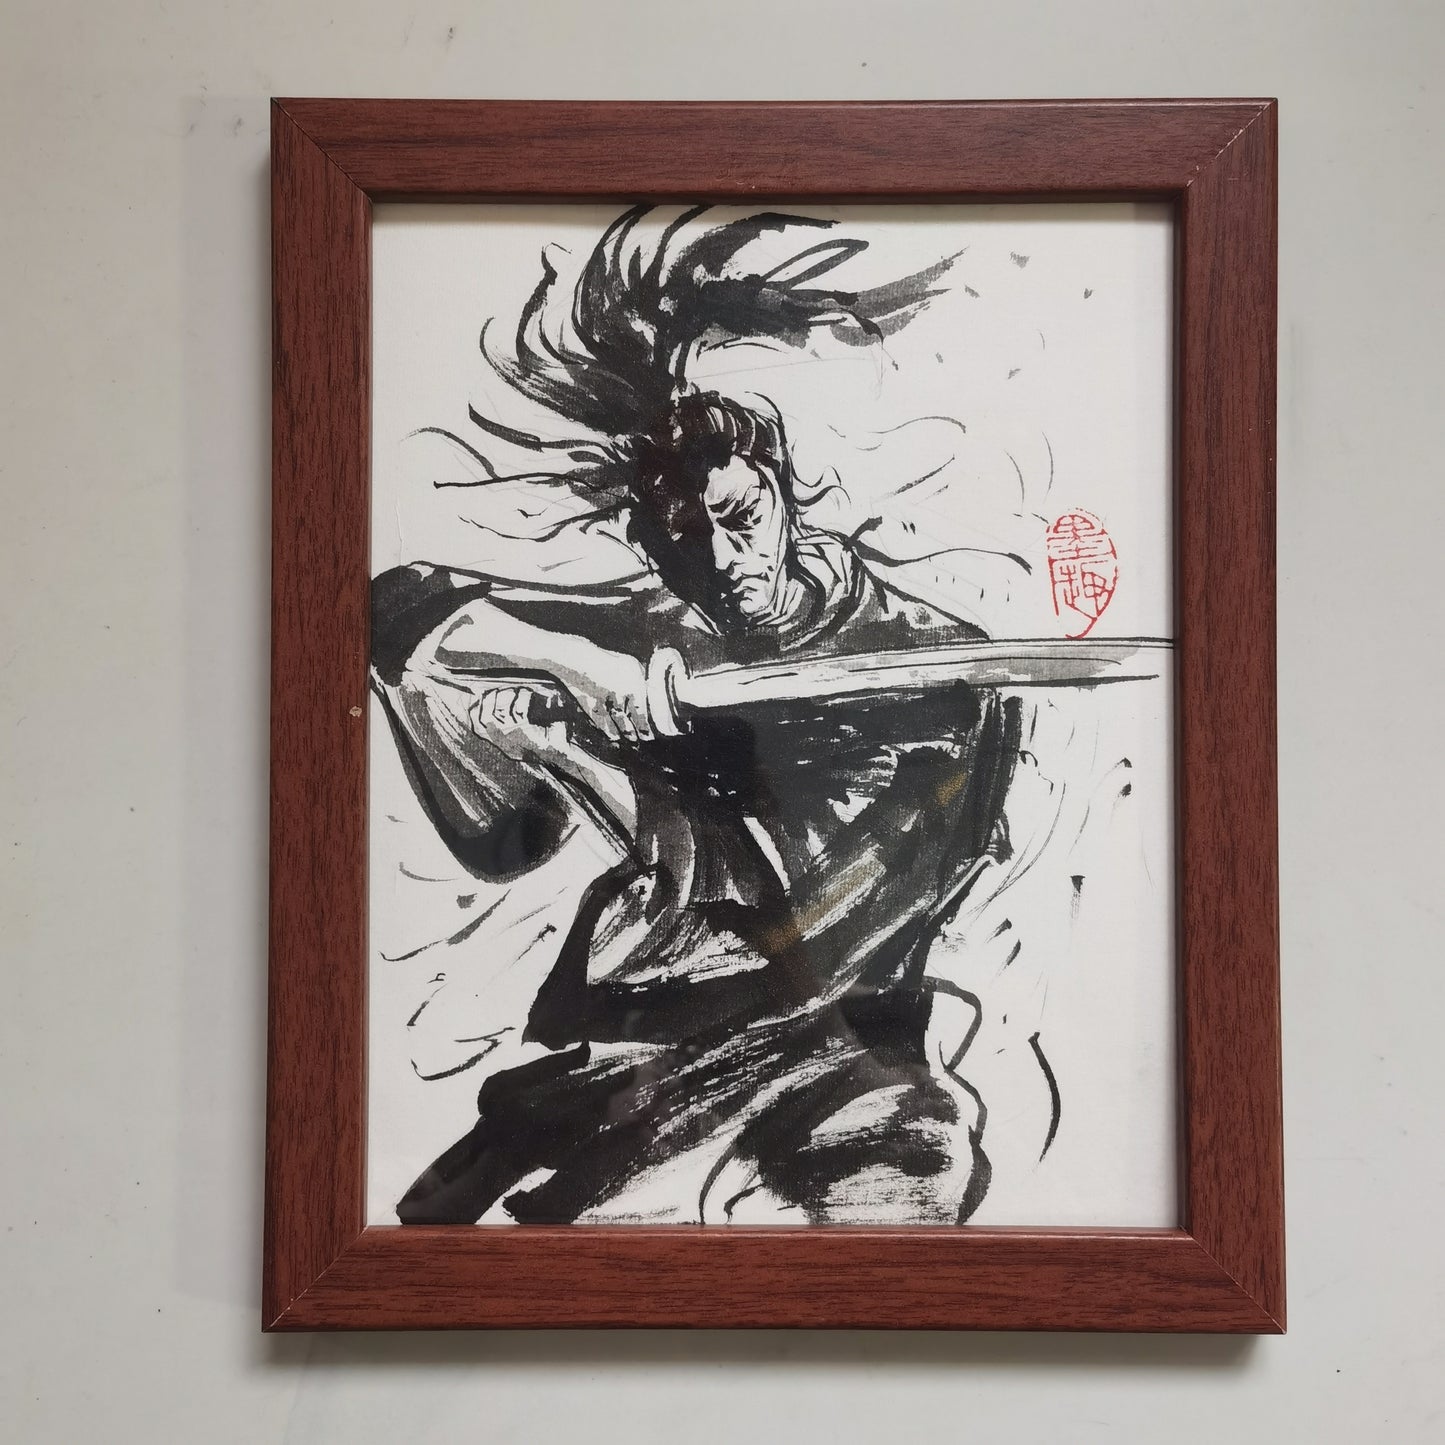 Chinese Painting Table Decoration in the Frame